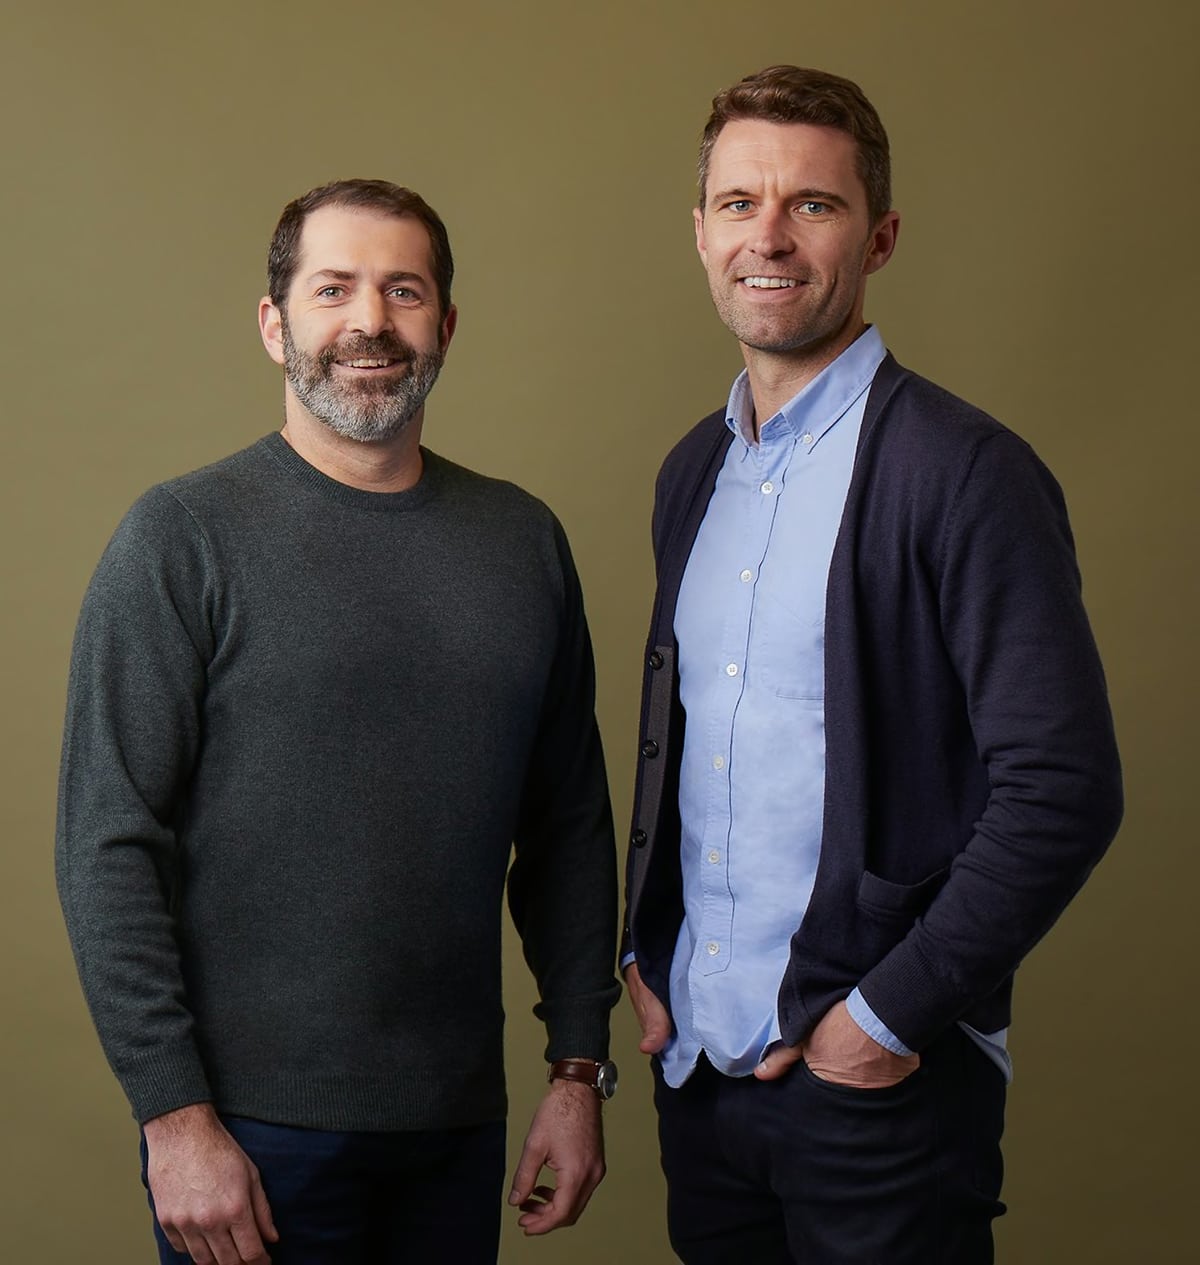 Allbirds was founded by former professional footballer Tim Brown (L) and biotech engineer Joey Zwillinger (R) in 2016 with the goal of developing a breakthrough footwear design that is based on natural materials and emphasizes sustainability